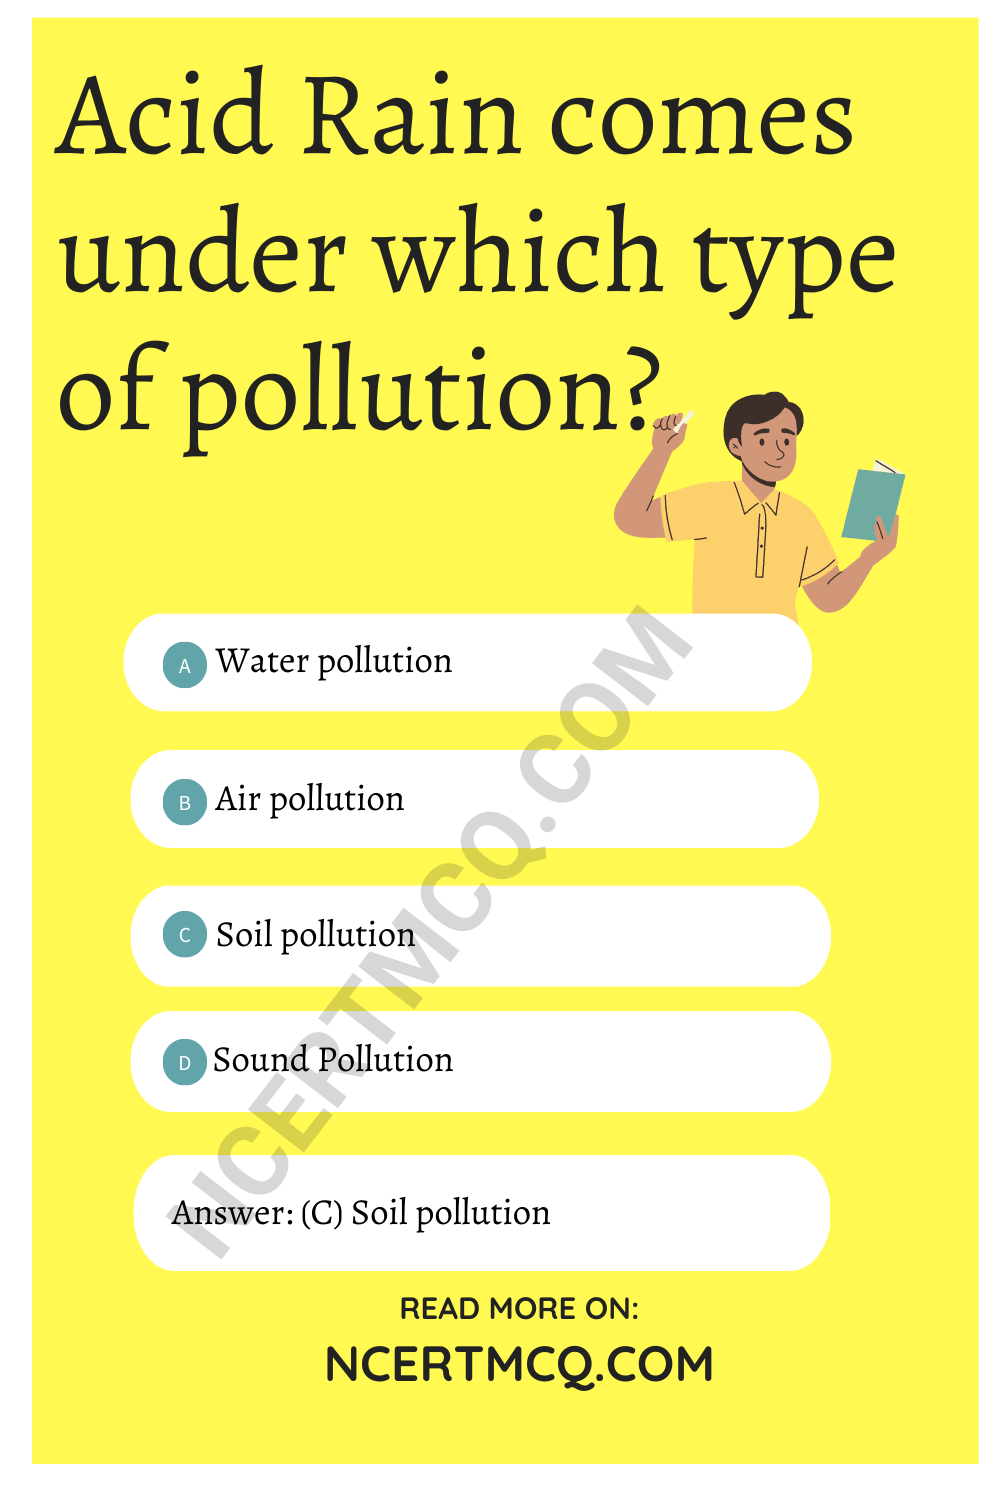 Acid Rain comes under which type of pollution?